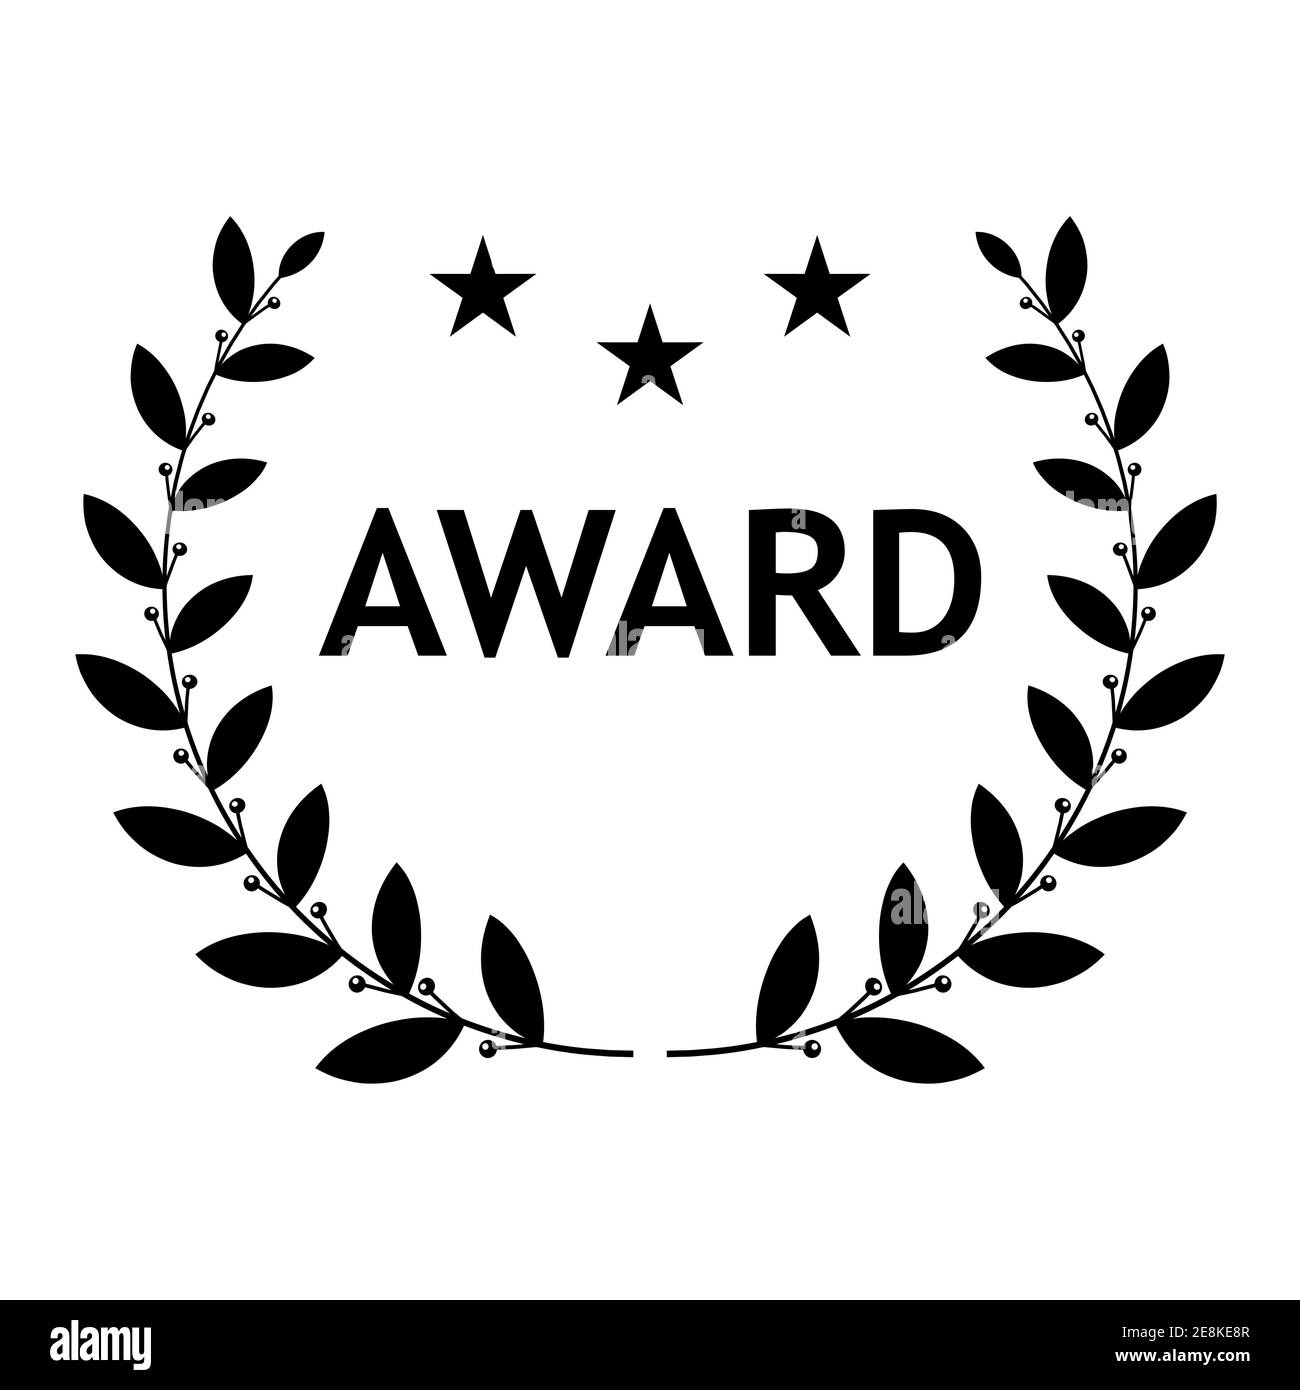 Film Award for the best film in the form of logo with laurel branch. Stock Vector